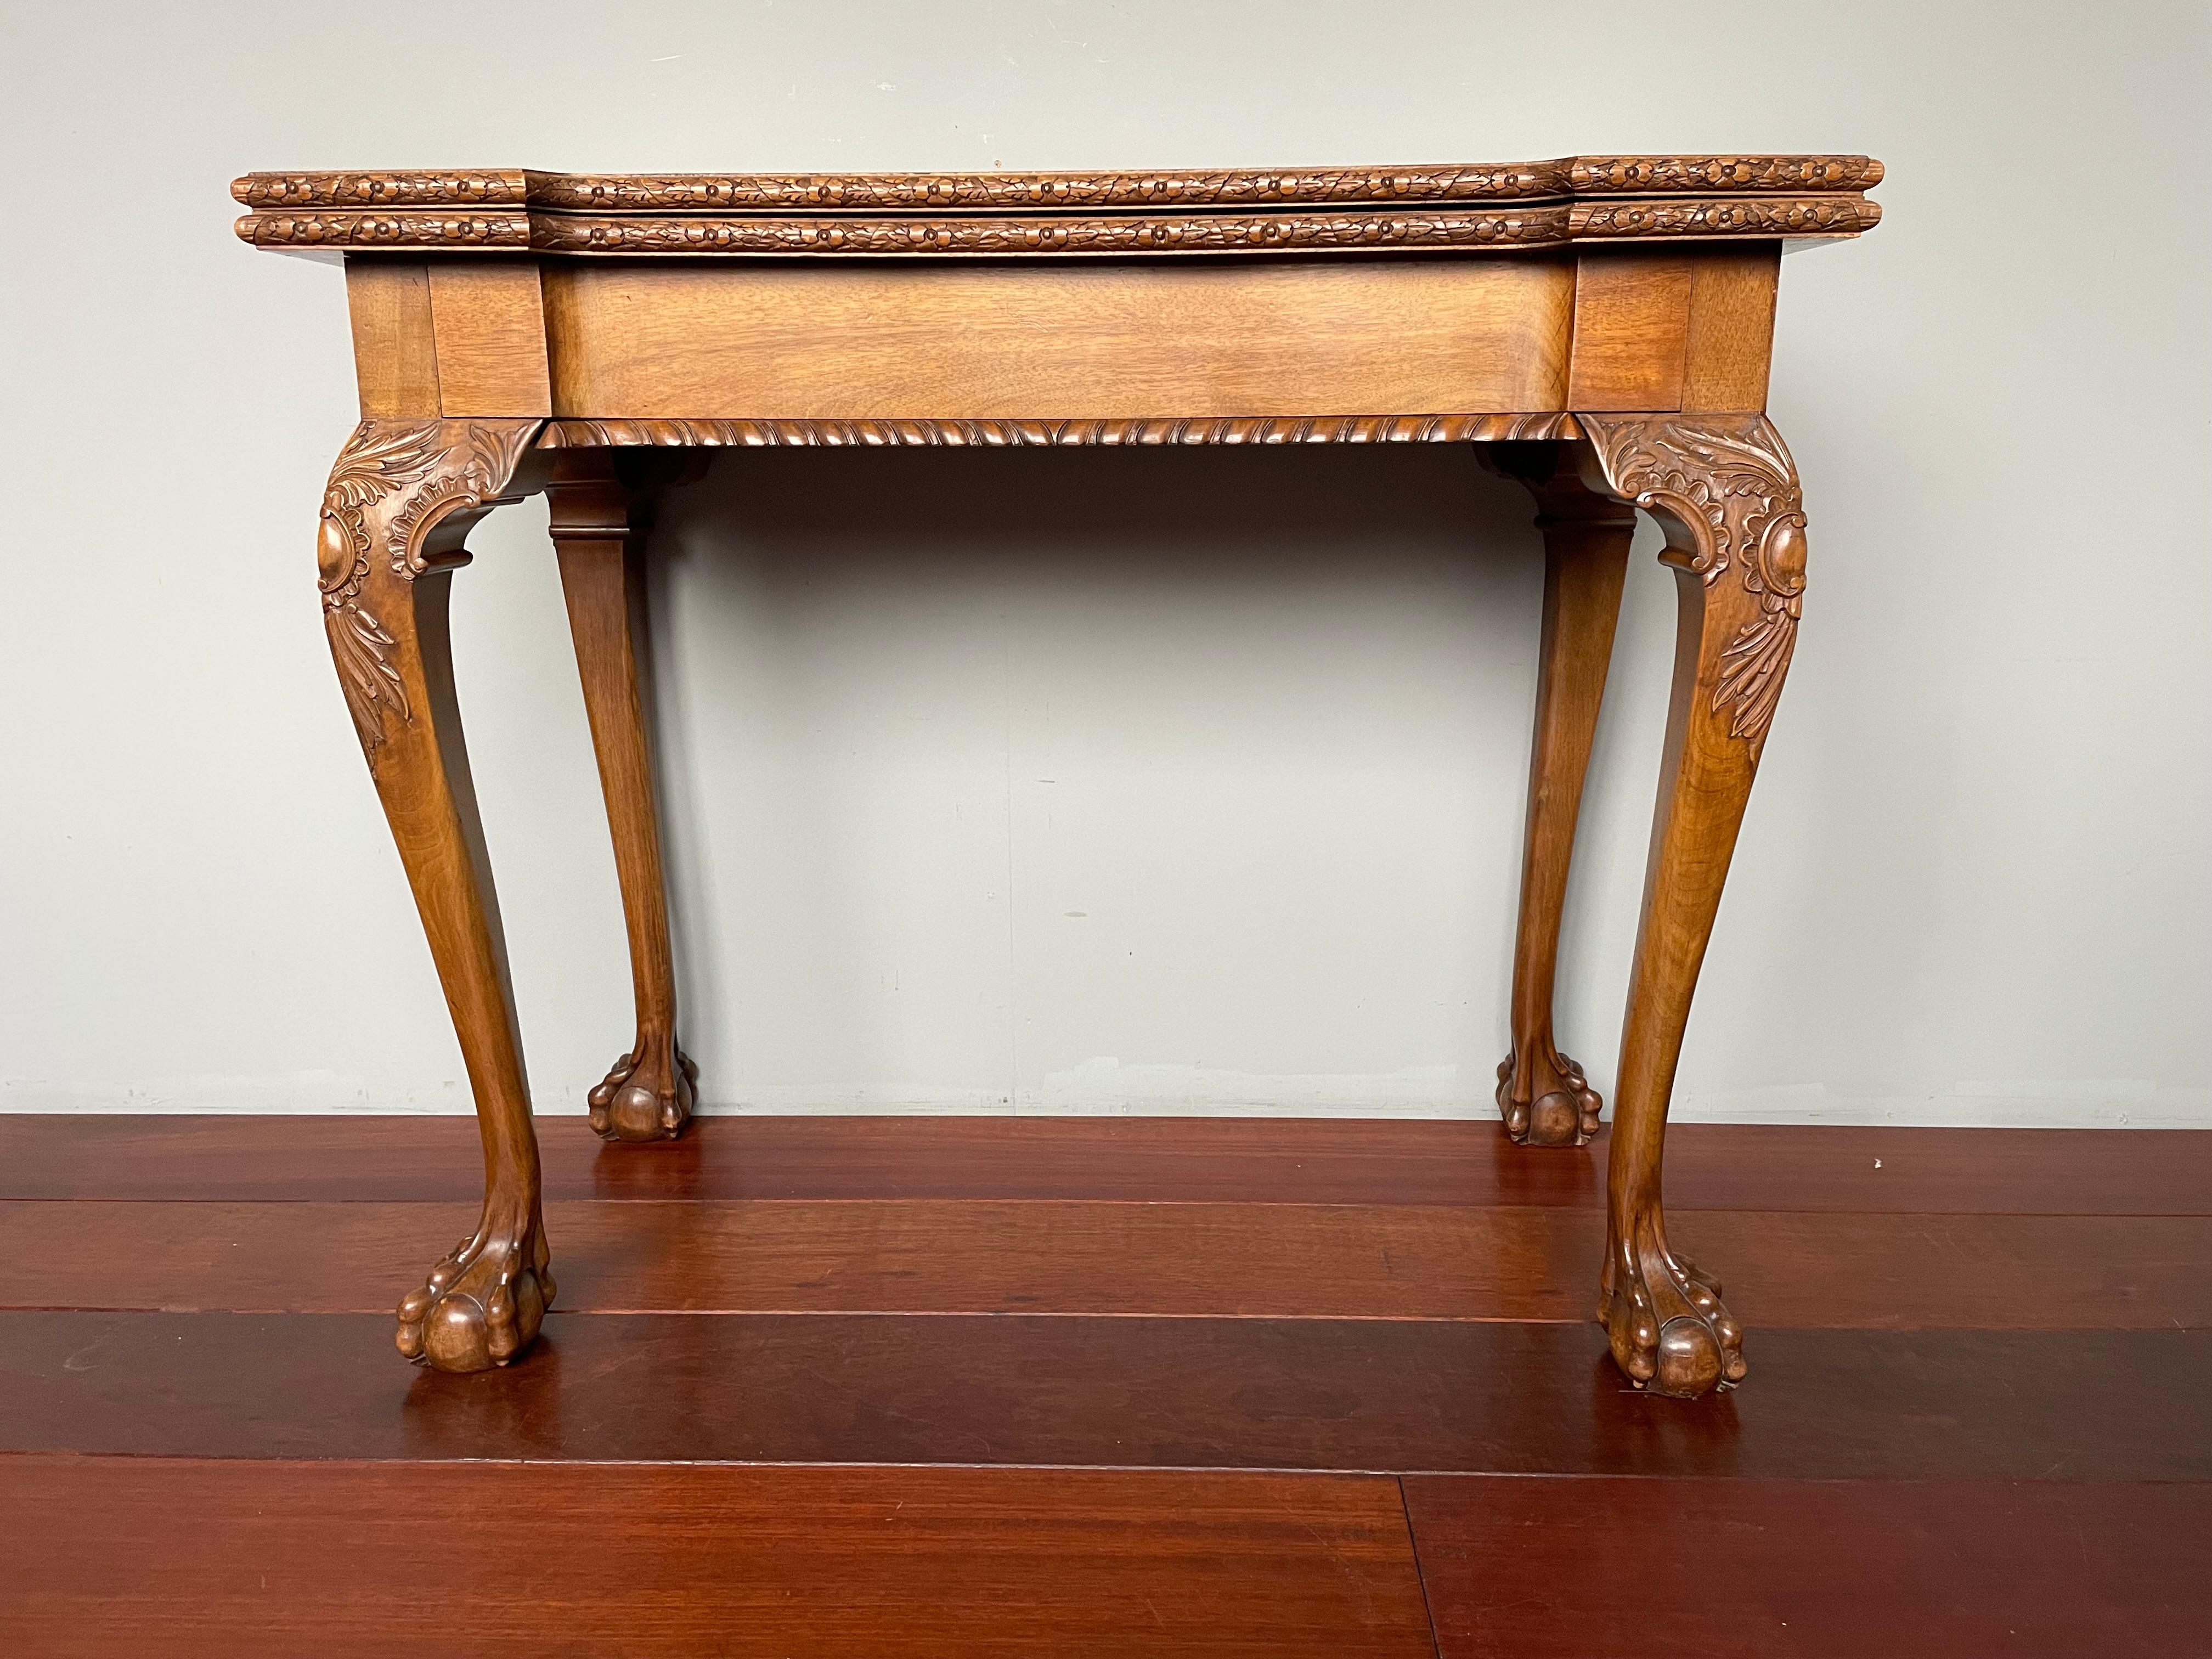 Amazing workmanship sidetable, also for unforgettable games of poker, bridge etc.

If you are looking for a beautiful sidetable to grace your living space then this all handcrafted specimen from the earliest years of the 20th century could be